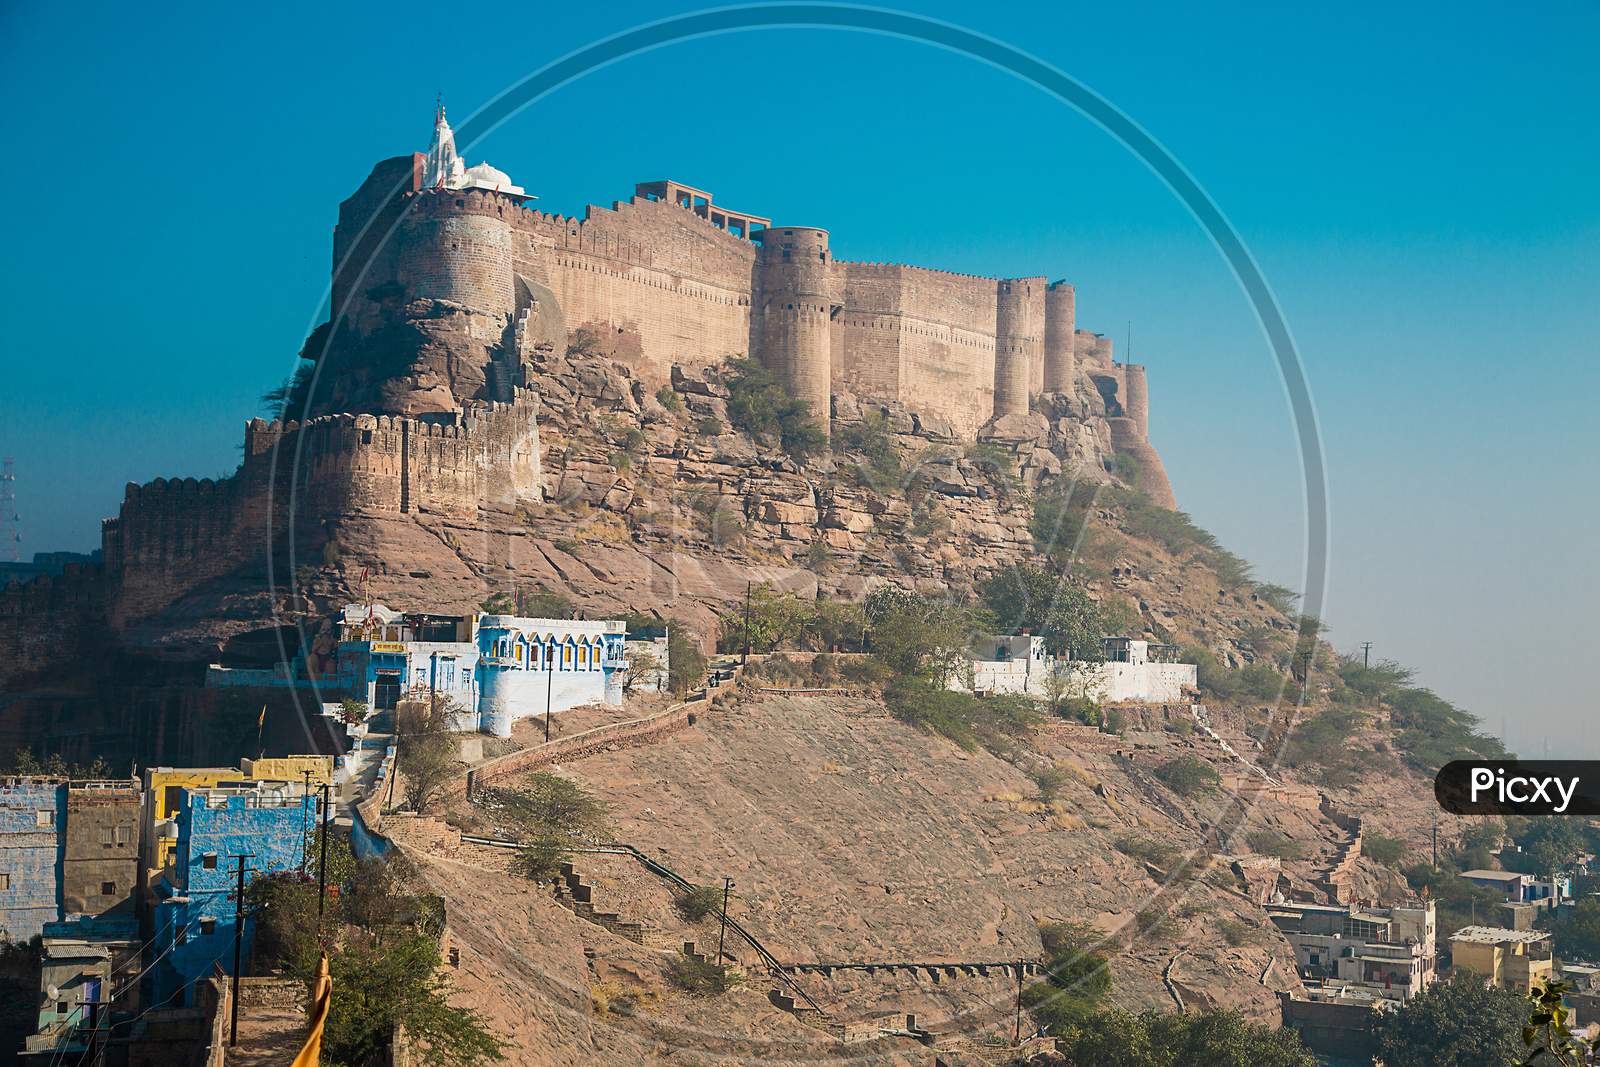 The Blue City And Mehrangarh Fort In Jodhpur. Rajasthan, India - Image